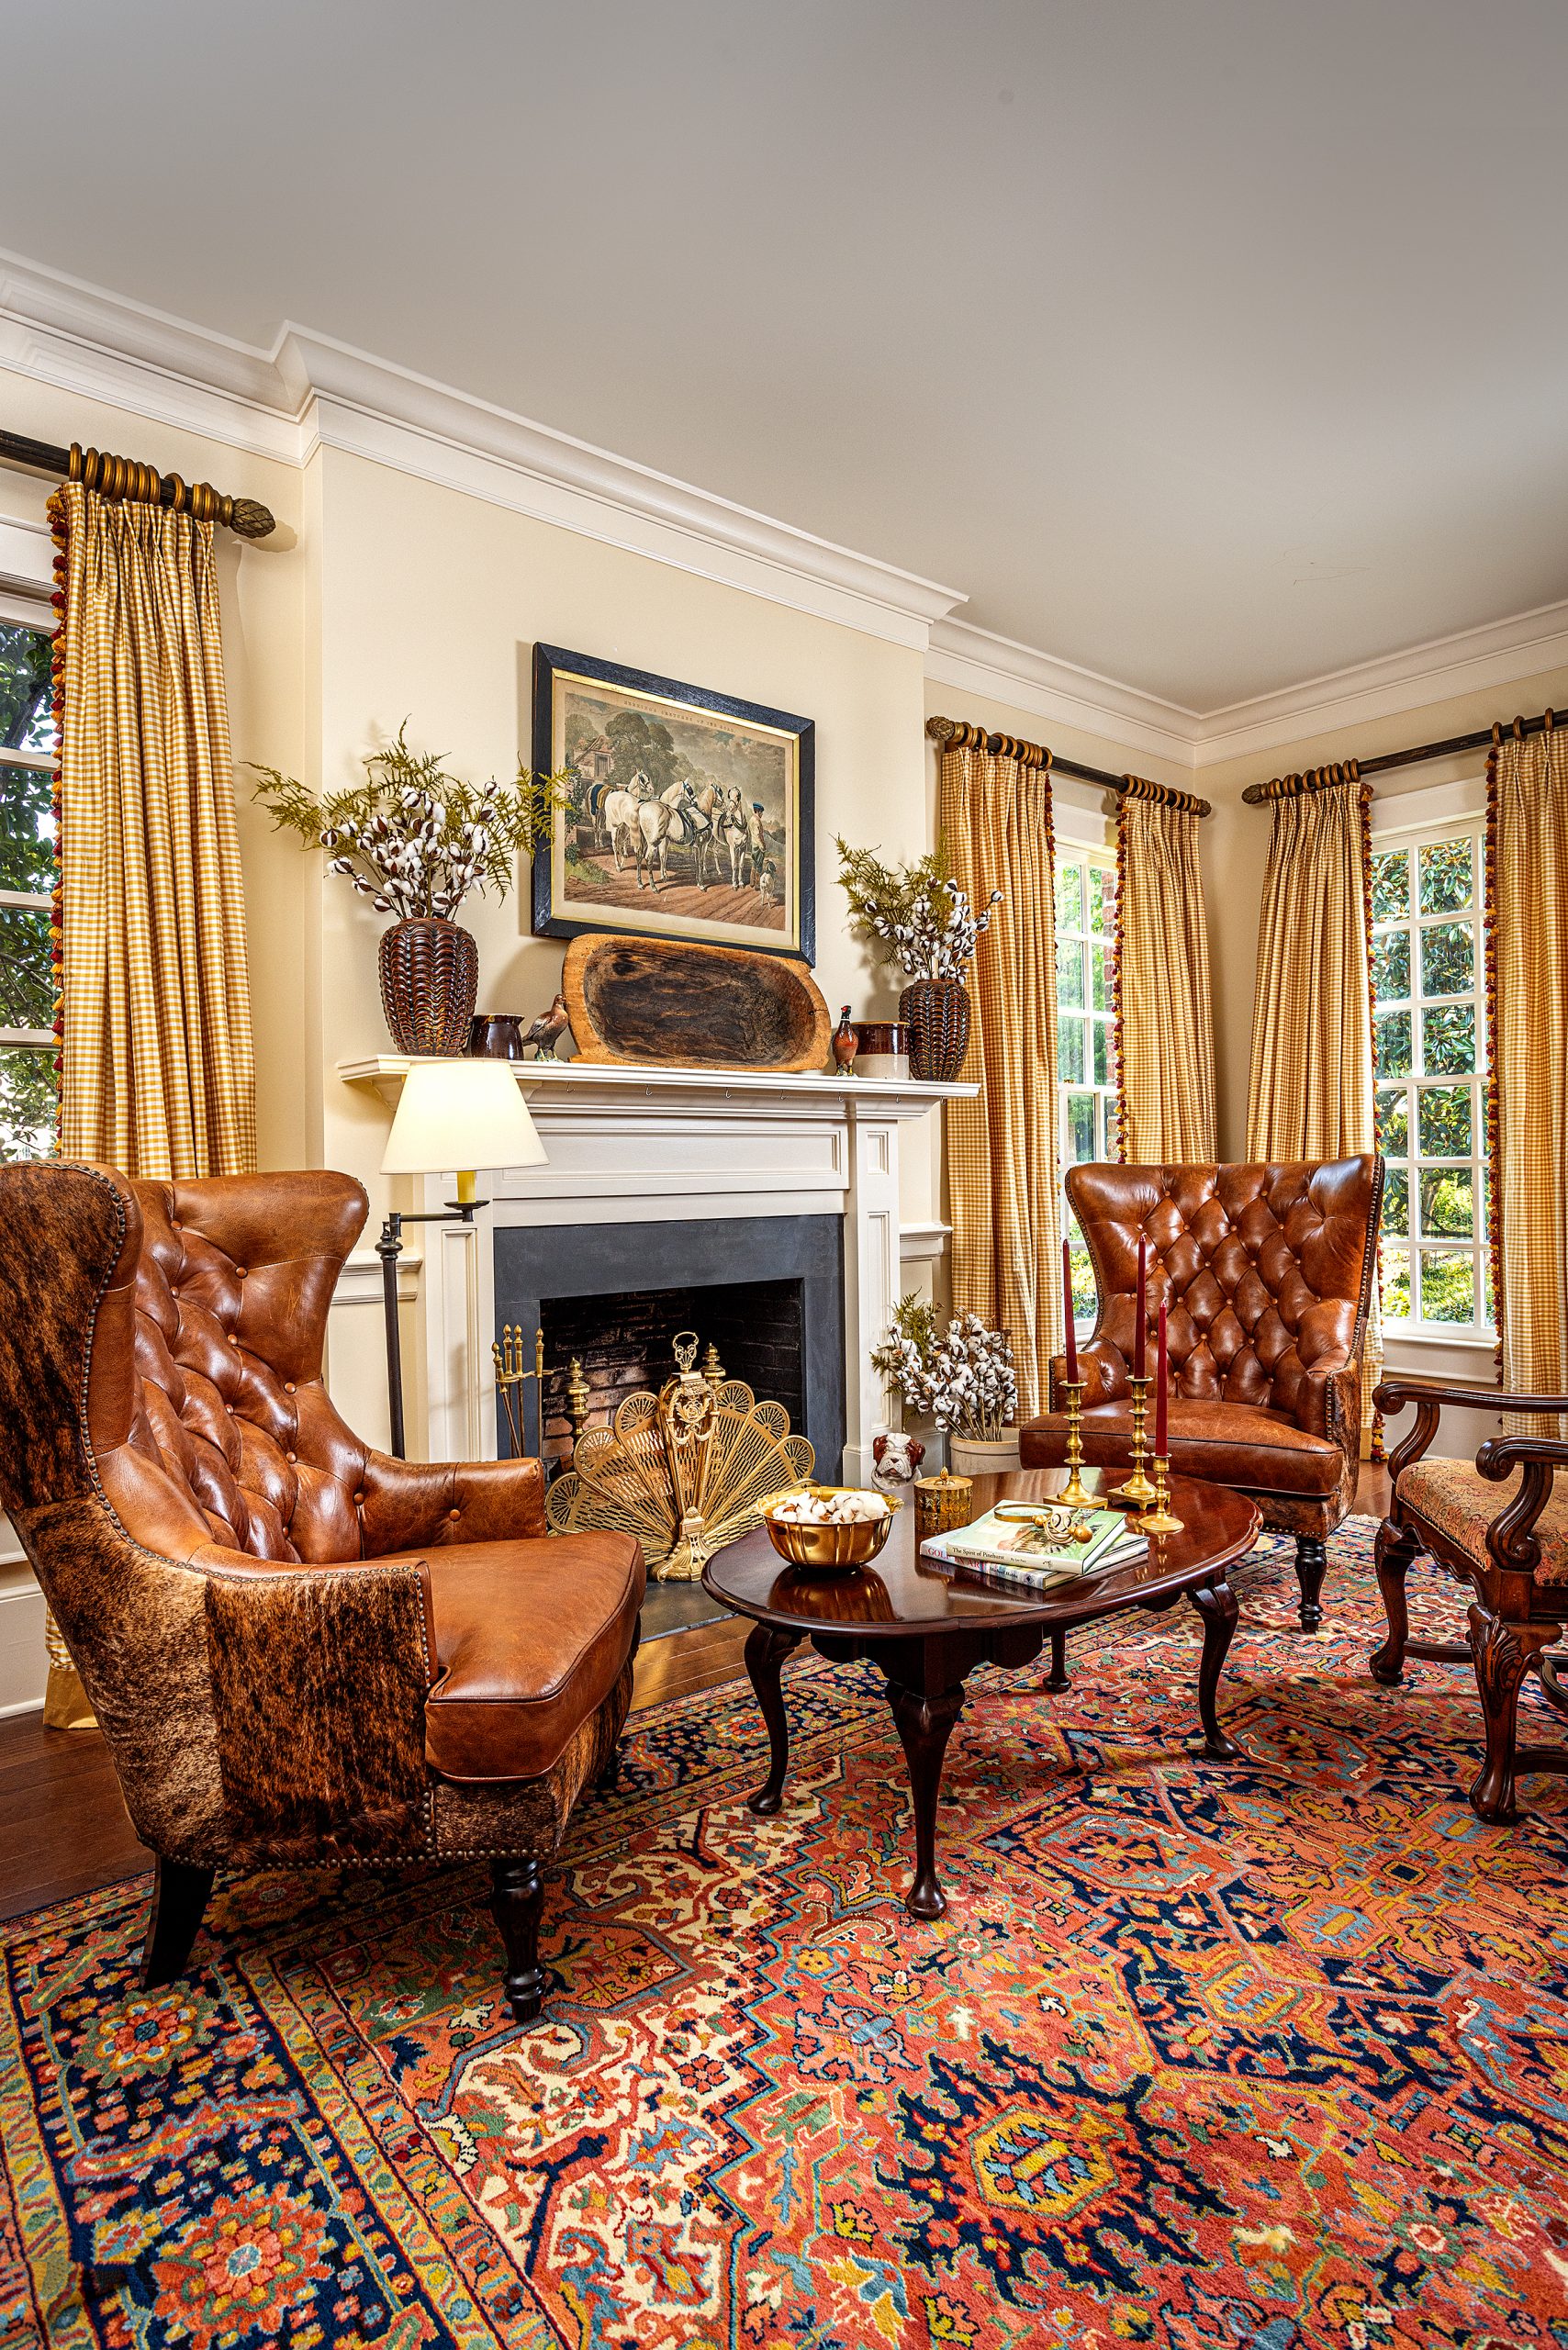 The Parhams’ living room is an homage to Jill’s love of horseback riding and traditional hunt scenes. A pair of leather and cowhide wing chairs frame the well-proportioned fireplace, adorned with cotton boll-filled pottery, quail figurines, and a carved dough bowl on the mantel. 